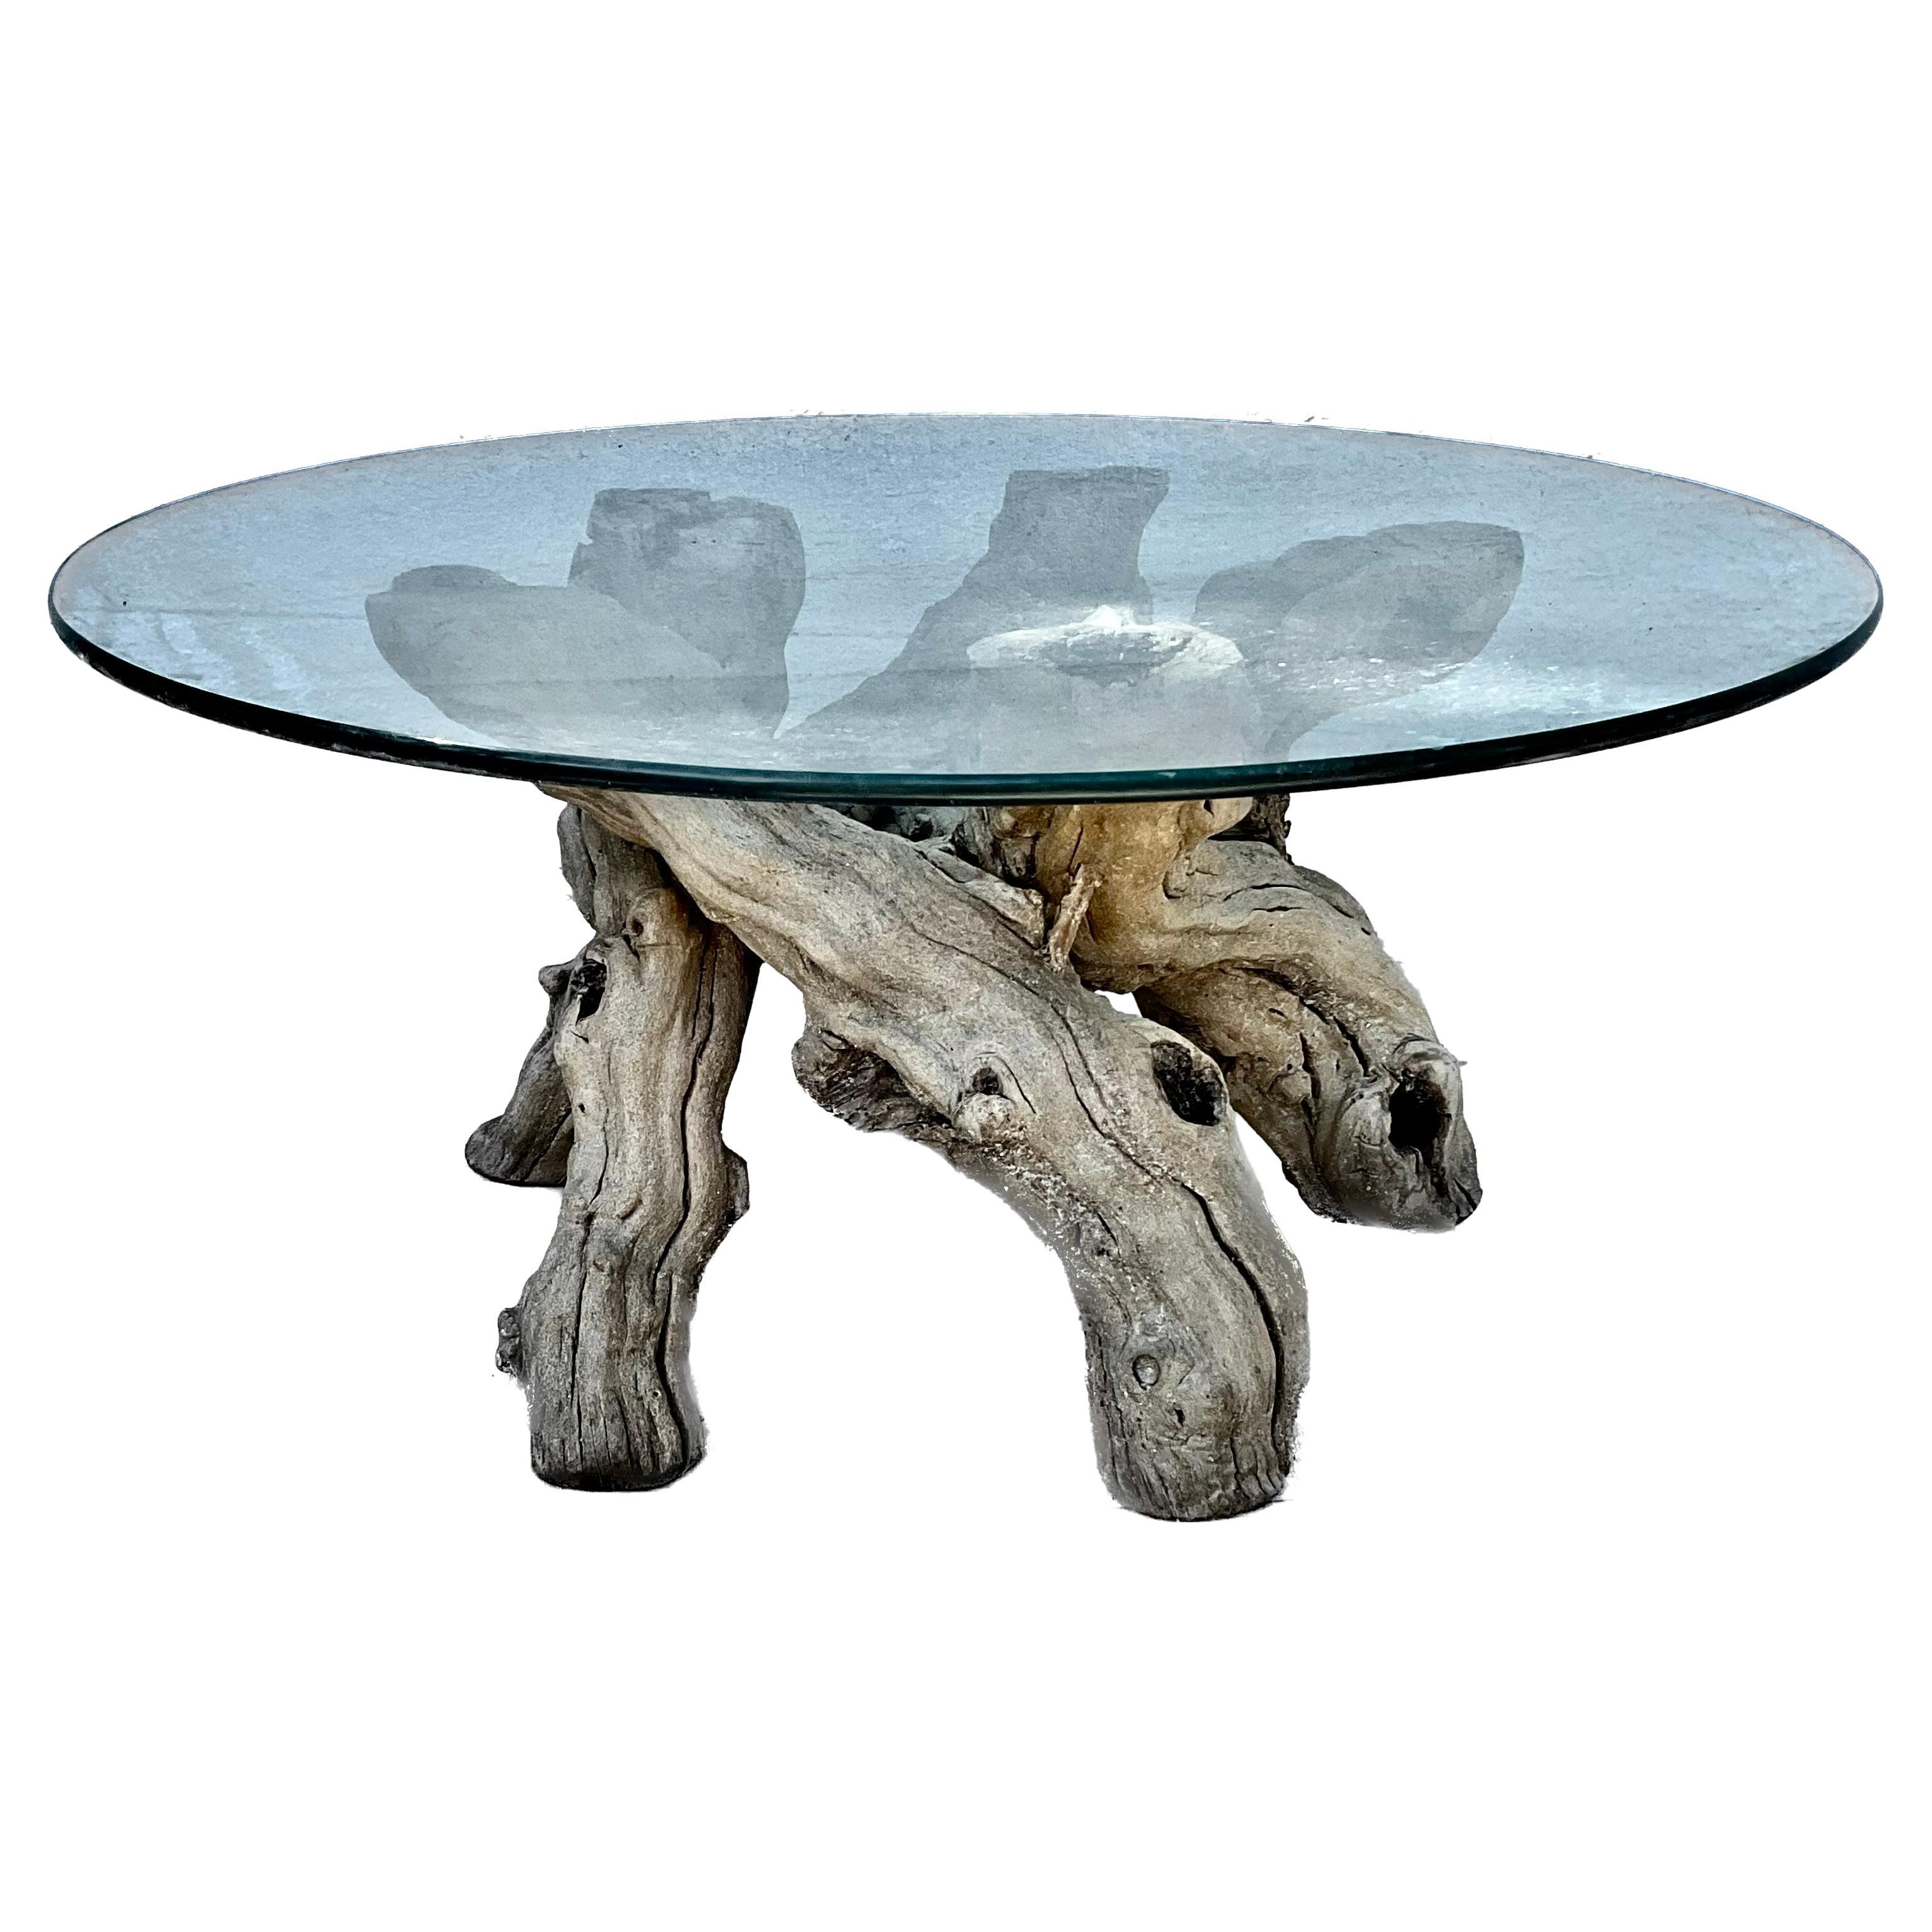 Organic Grape Vine Base Table With Round Glass Top For Sale